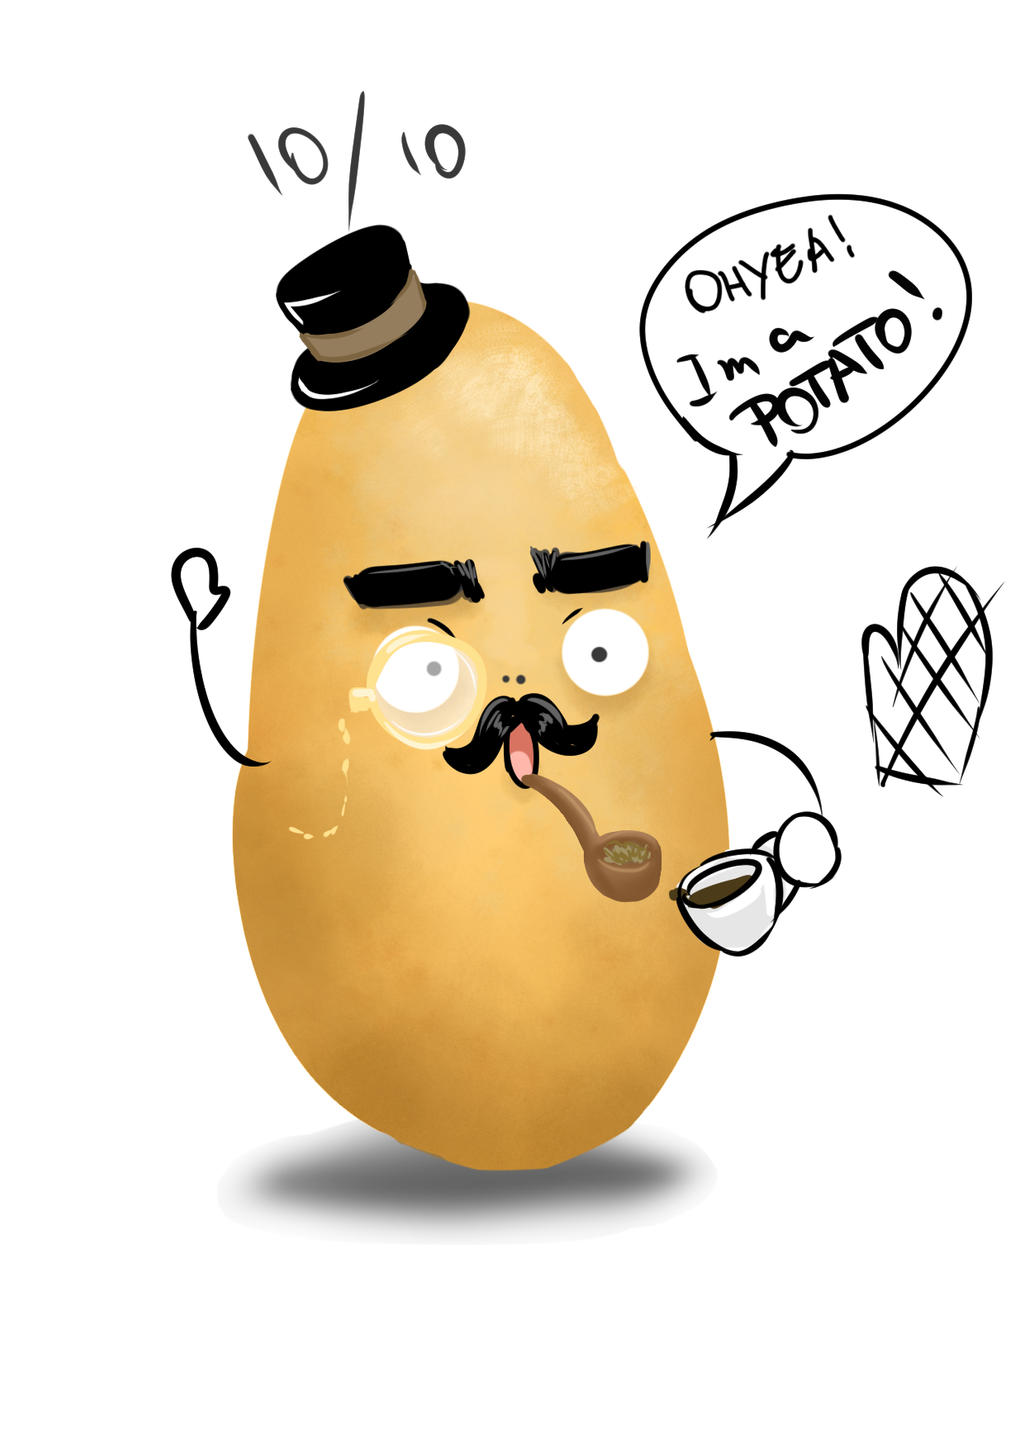 laziness potatoes face PNG by Donatoinklinggamer on DeviantArt